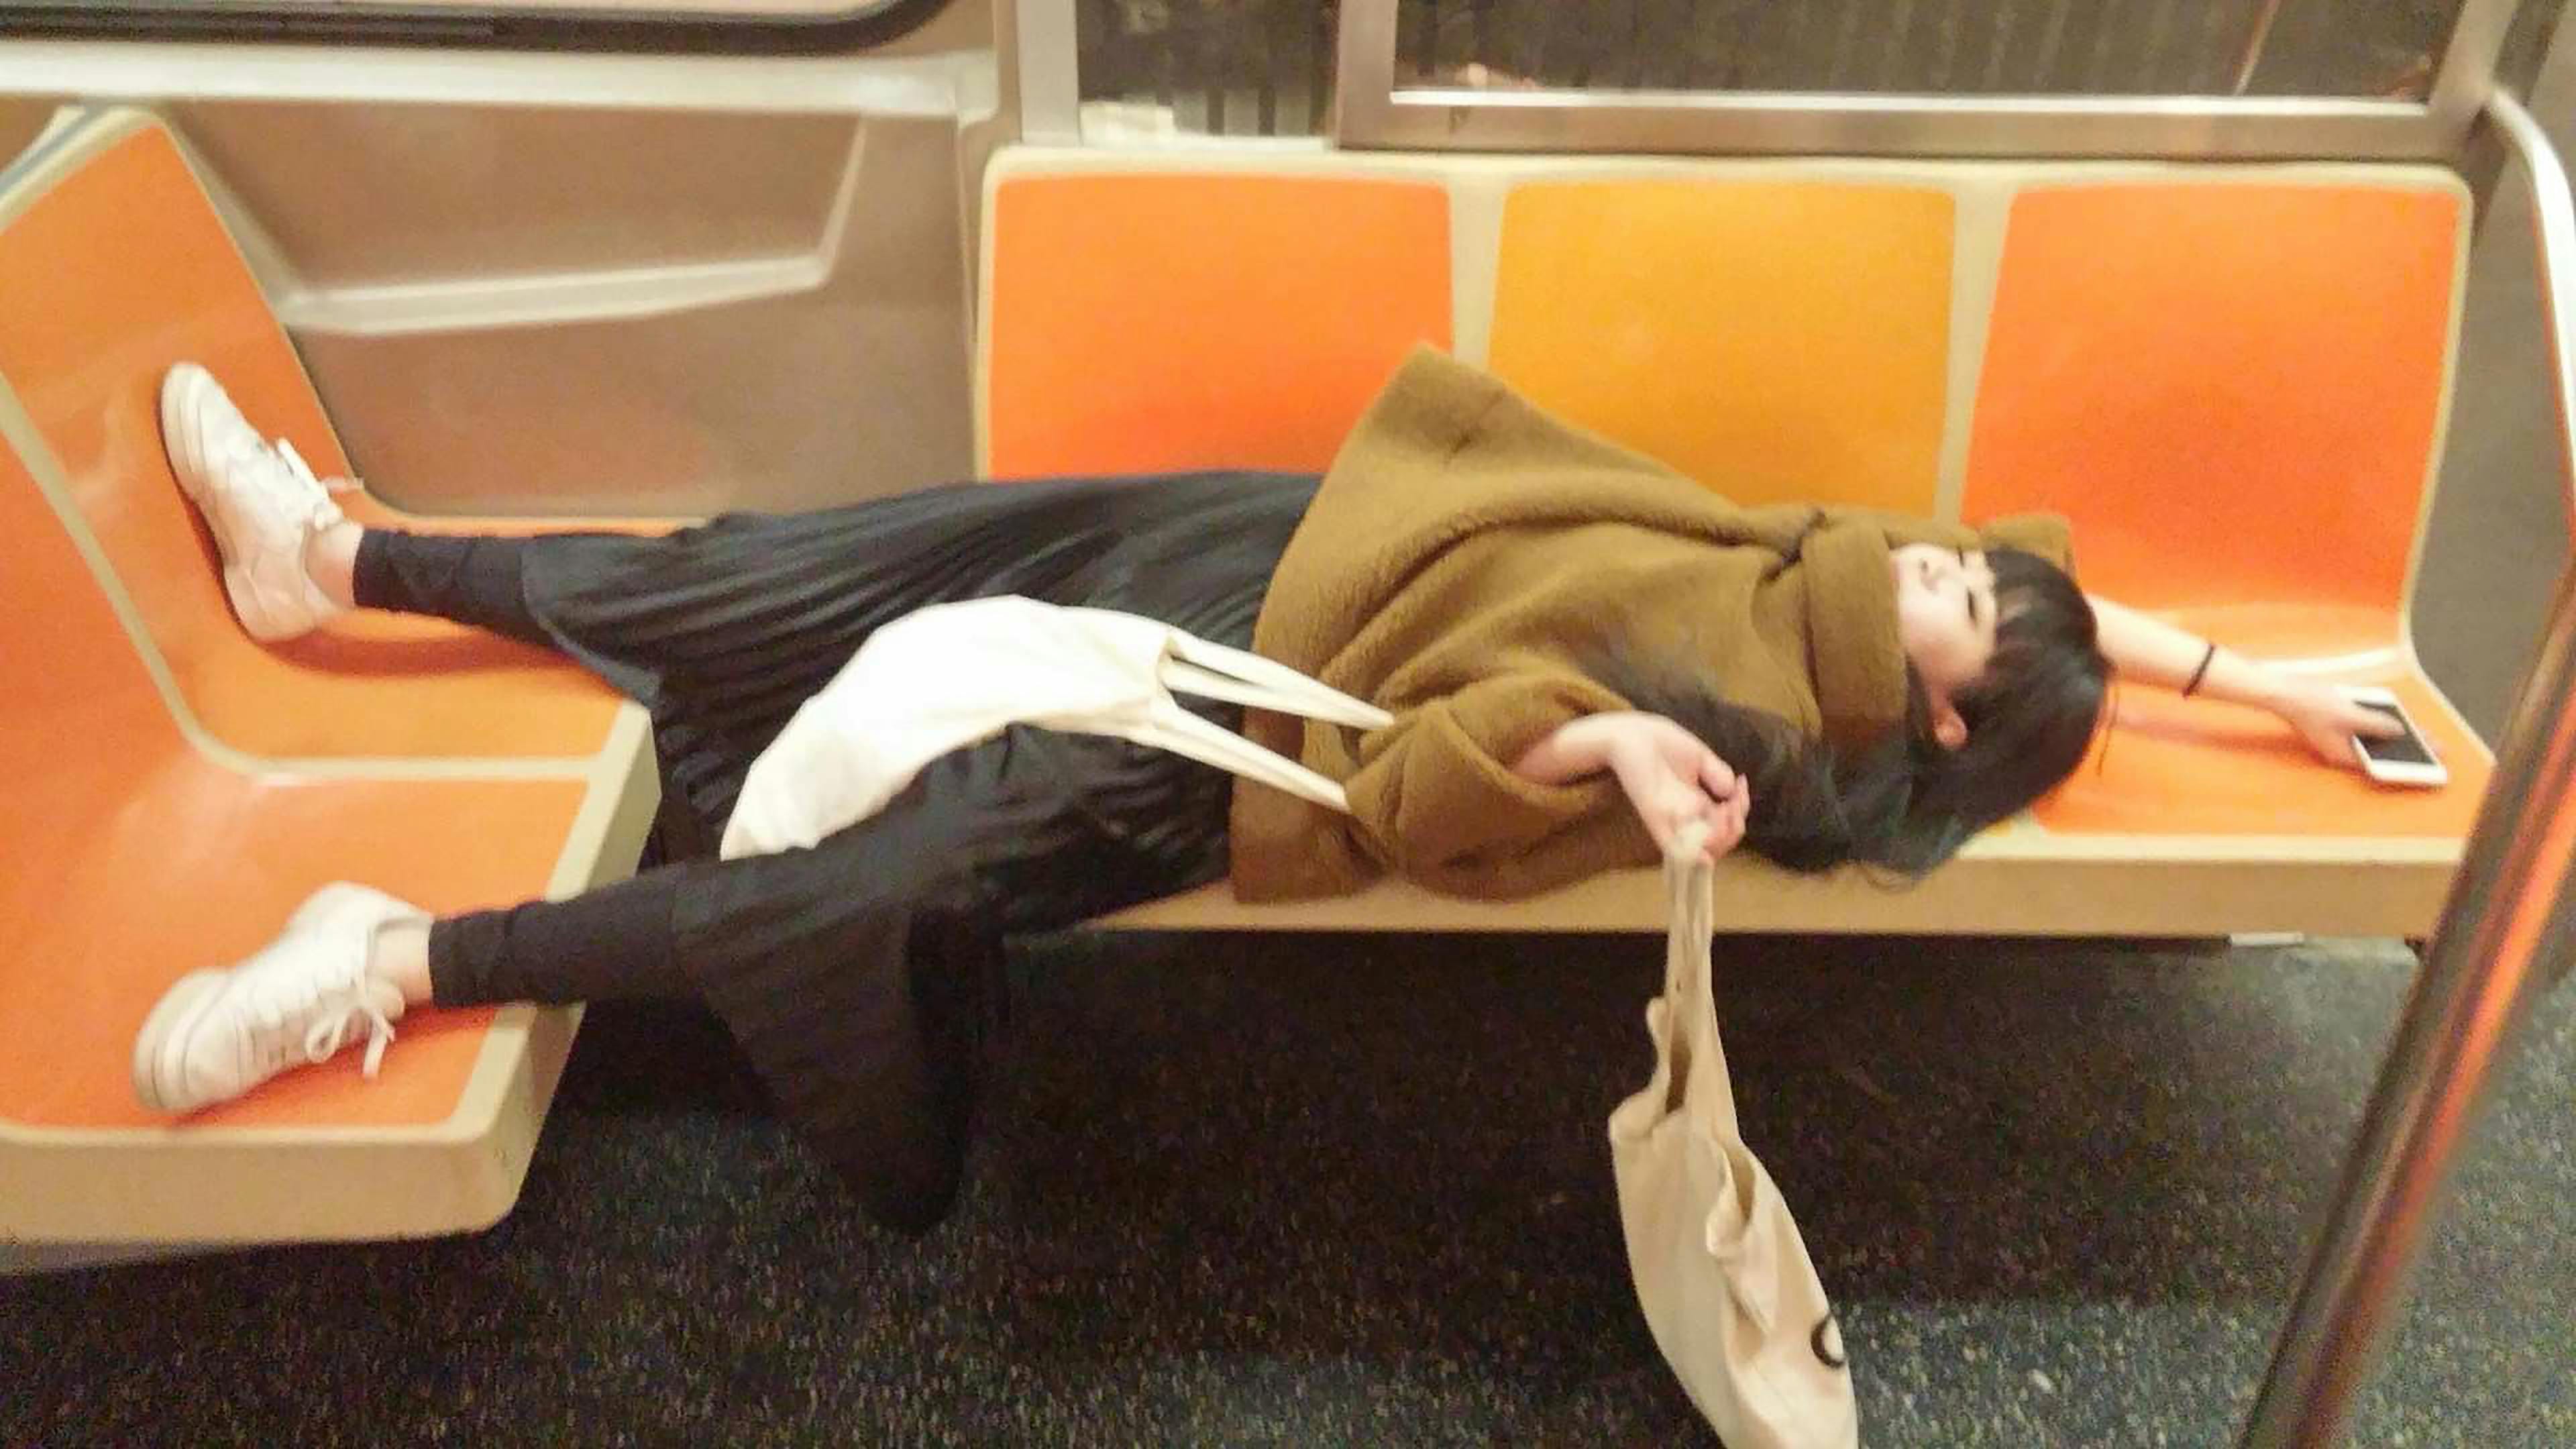 A portrait of Qian Cheng lying across the orange seats of a subway car. Qian is wearing a brown turtleneck sweater that is covering her chin. One of her arms is stretched behind her head holding an iPhone; the other is holding two tote bags.